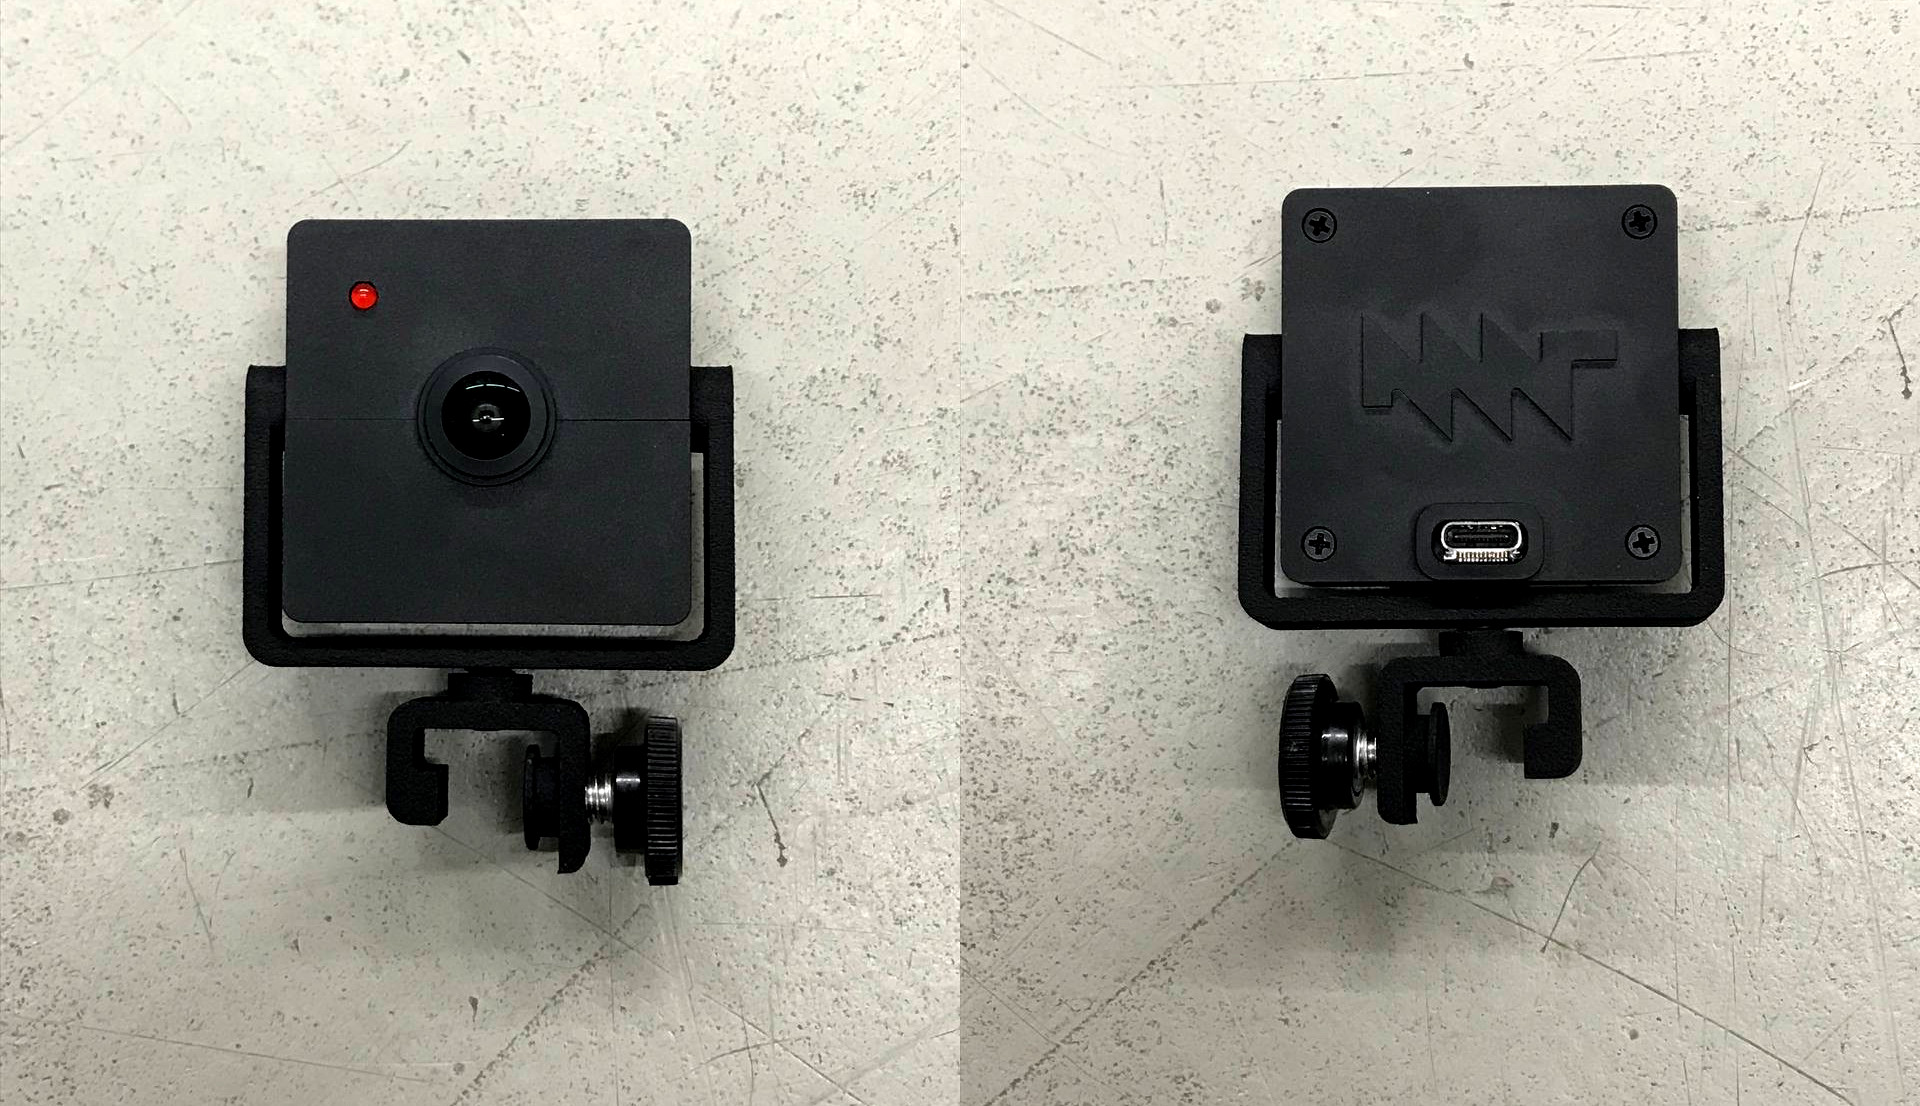 MNT Reform Camera, Front and Back